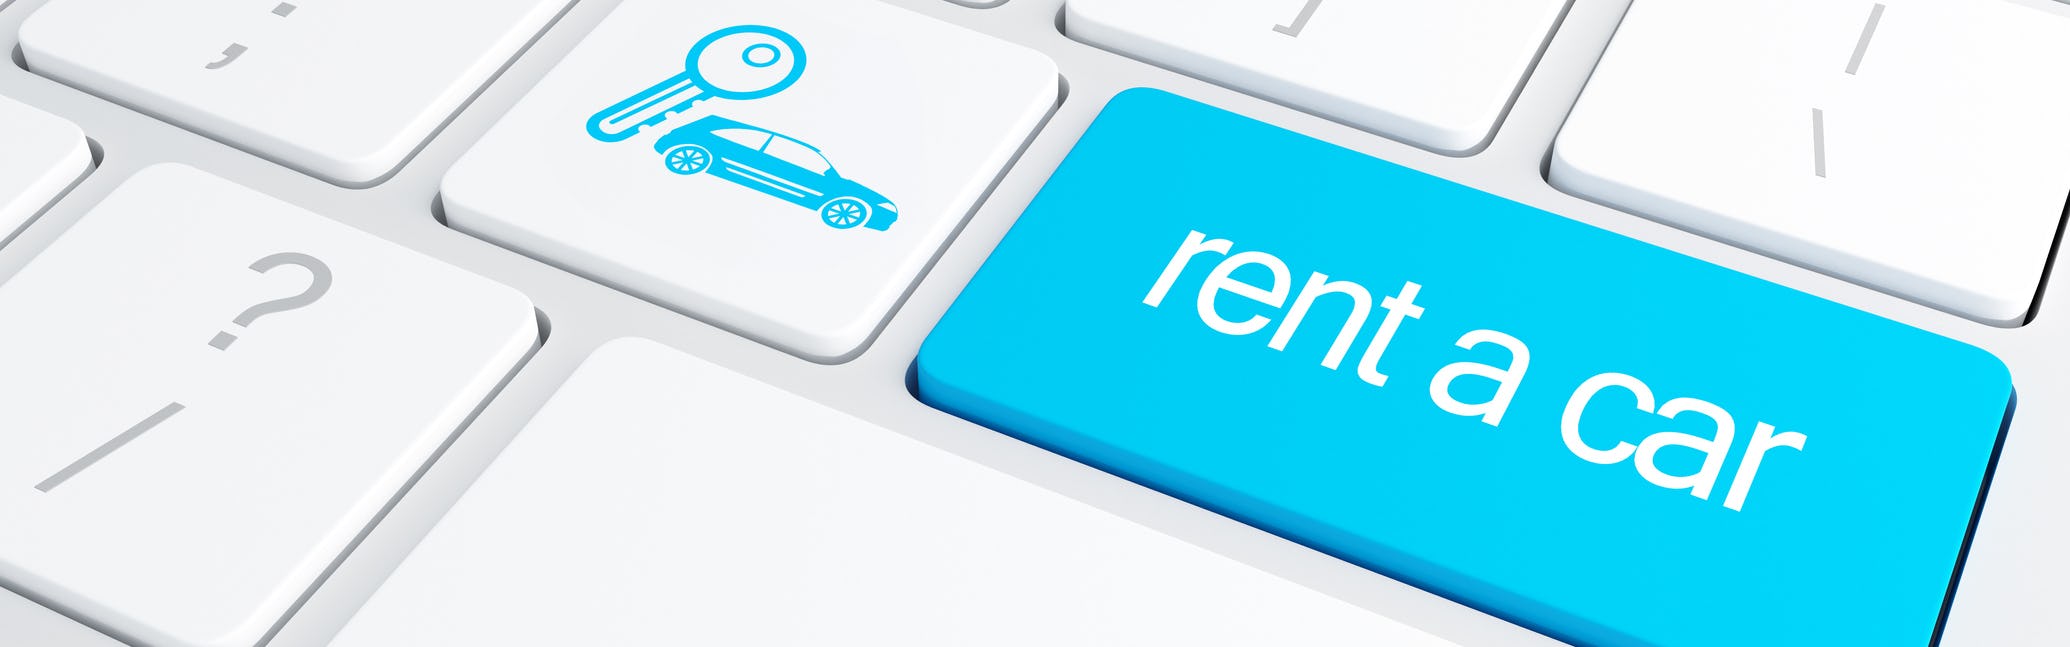 keyboard with "rent a car" on key